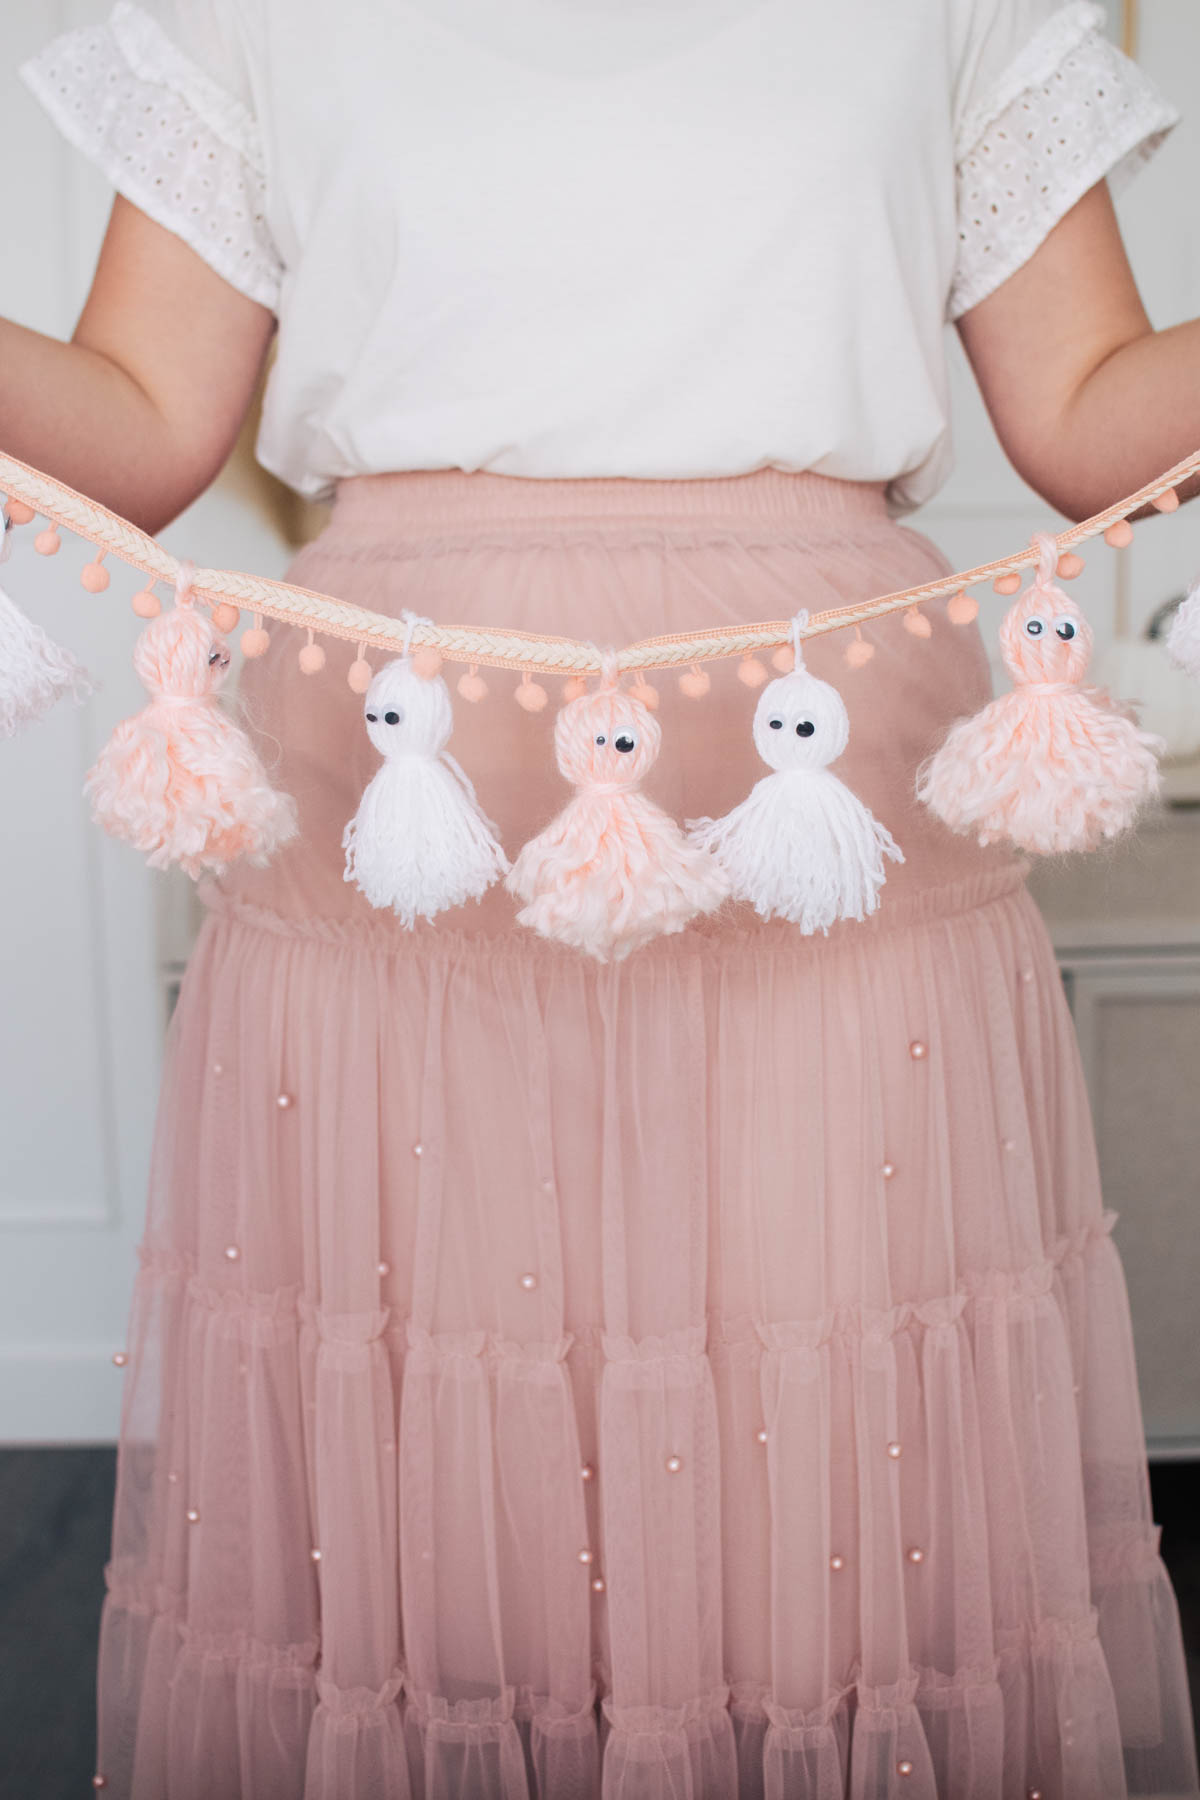 Woman wearing pink skirt holds pink and white yarn ghost garland.